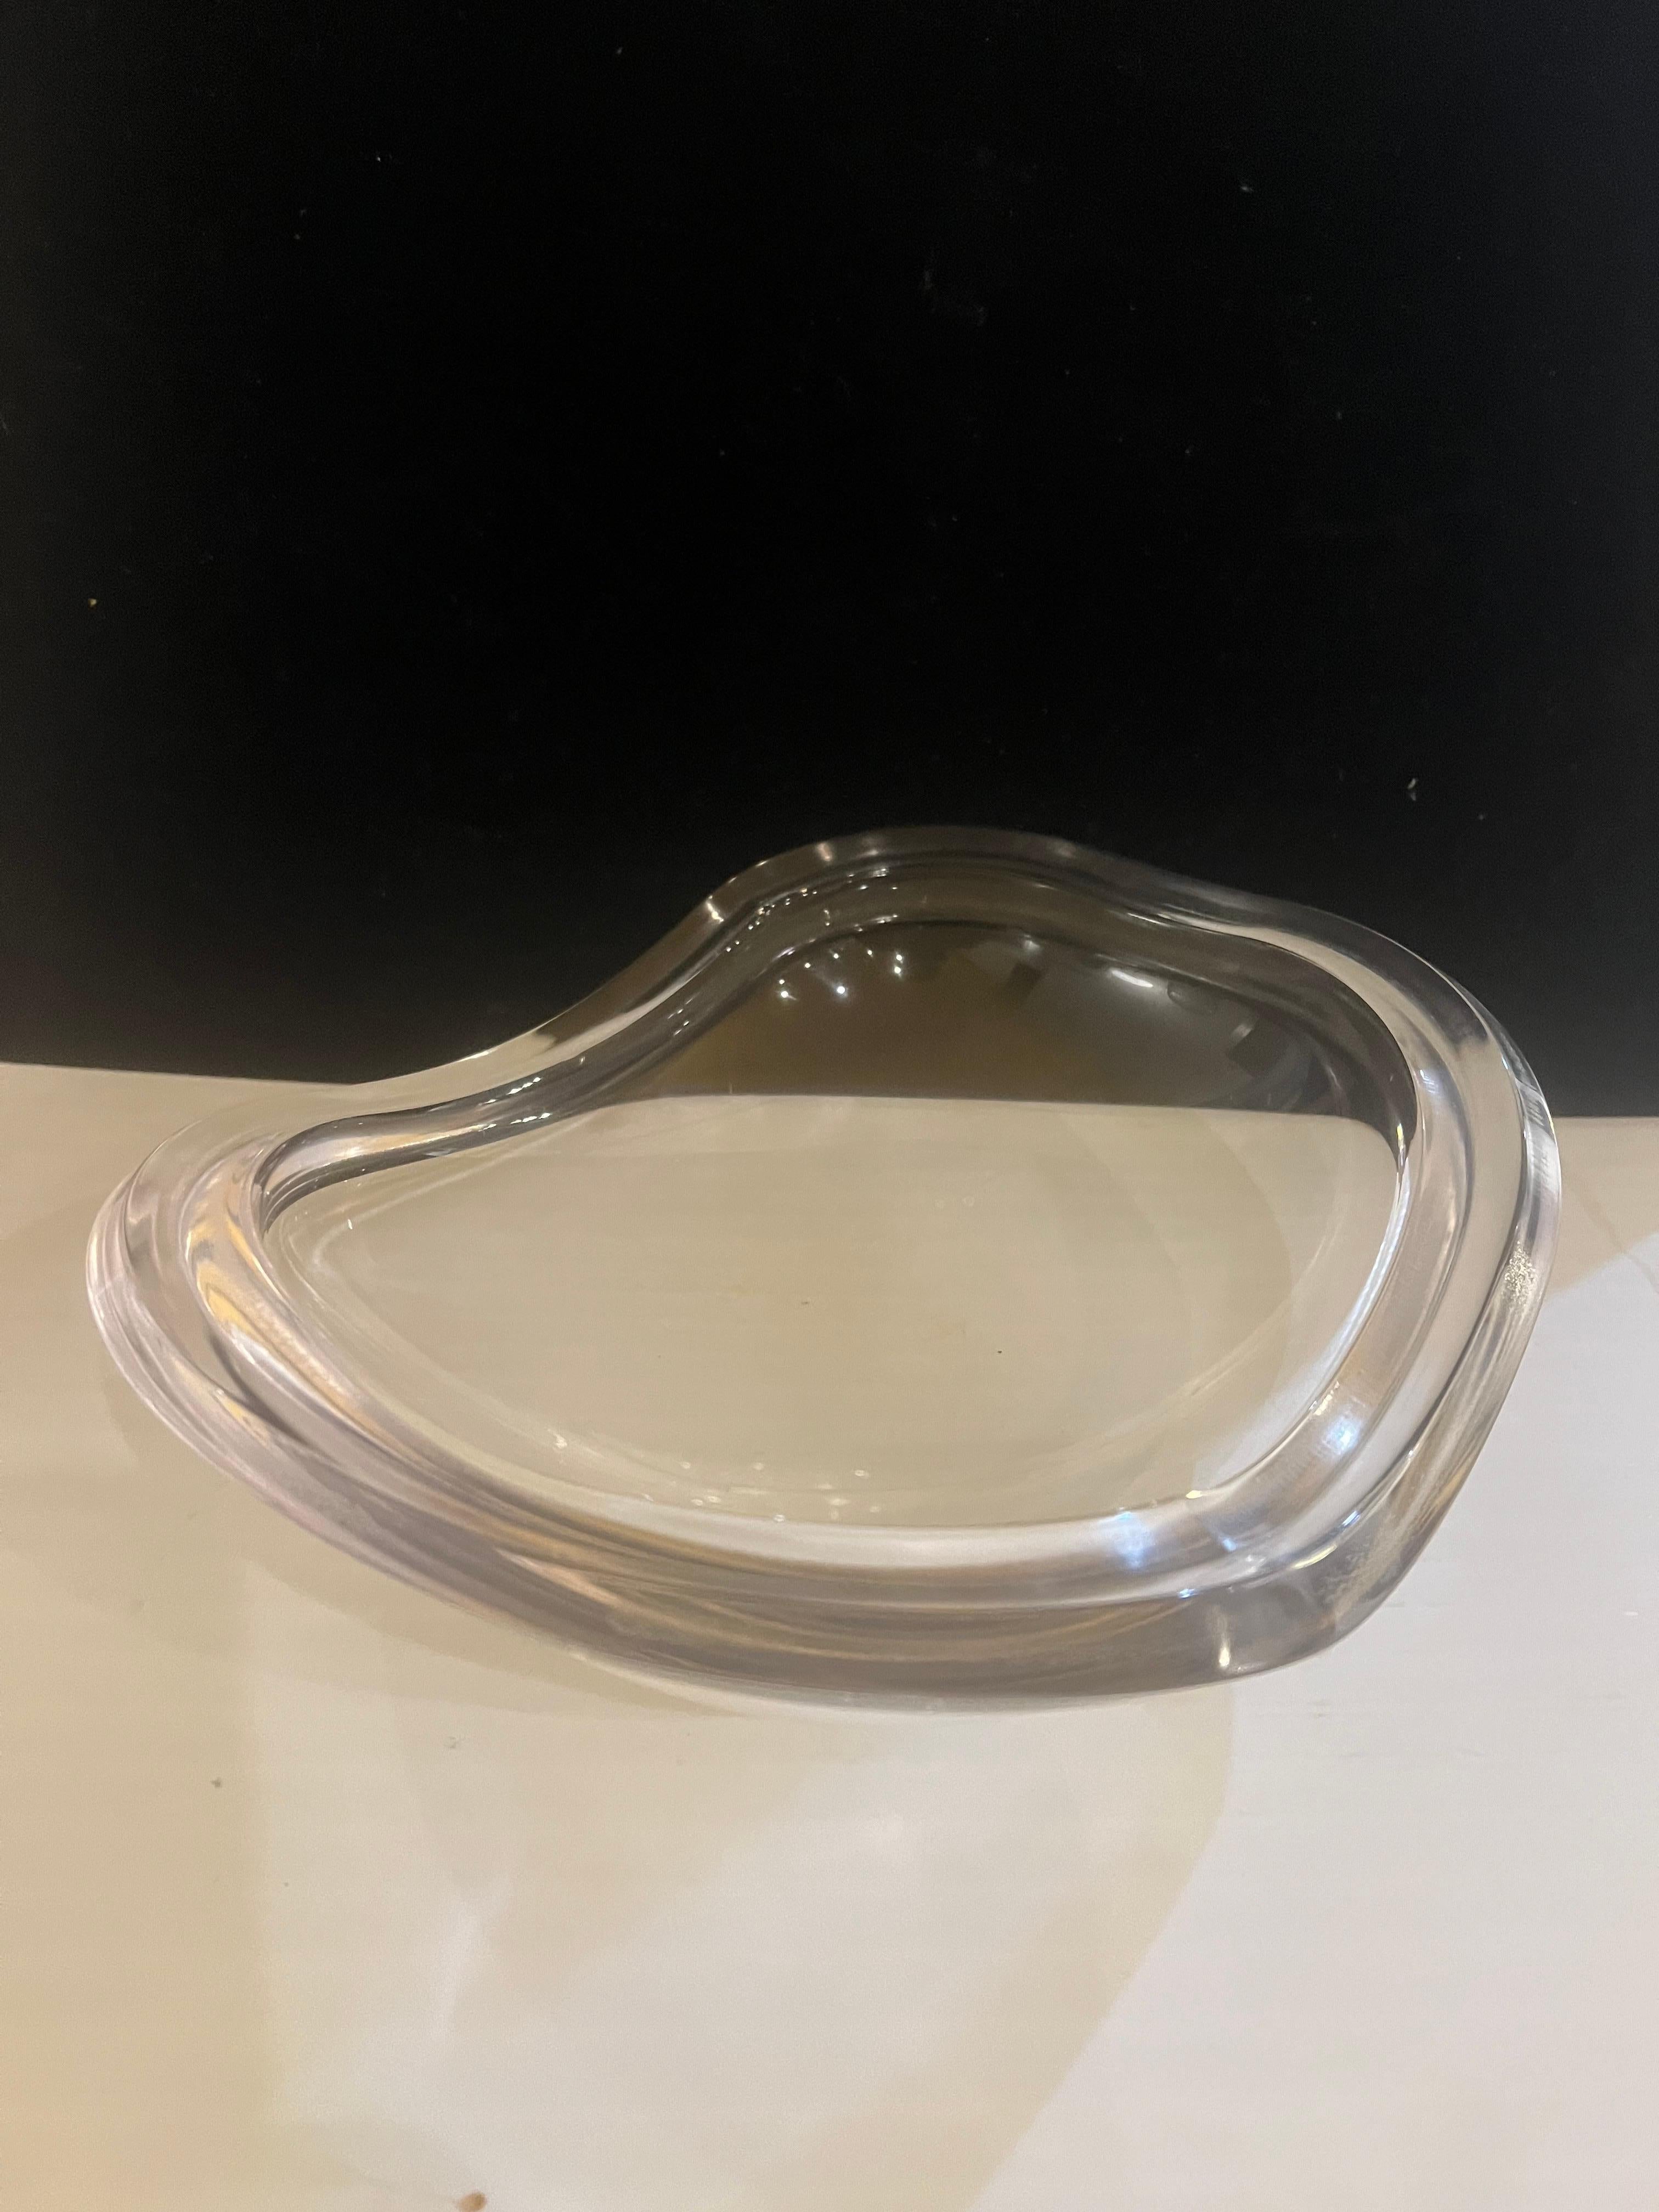 Pristine Mid-Century Biomorphic Lucite Catch-it-all Bowl Attributed To Ritts In Excellent Condition For Sale In San Diego, CA